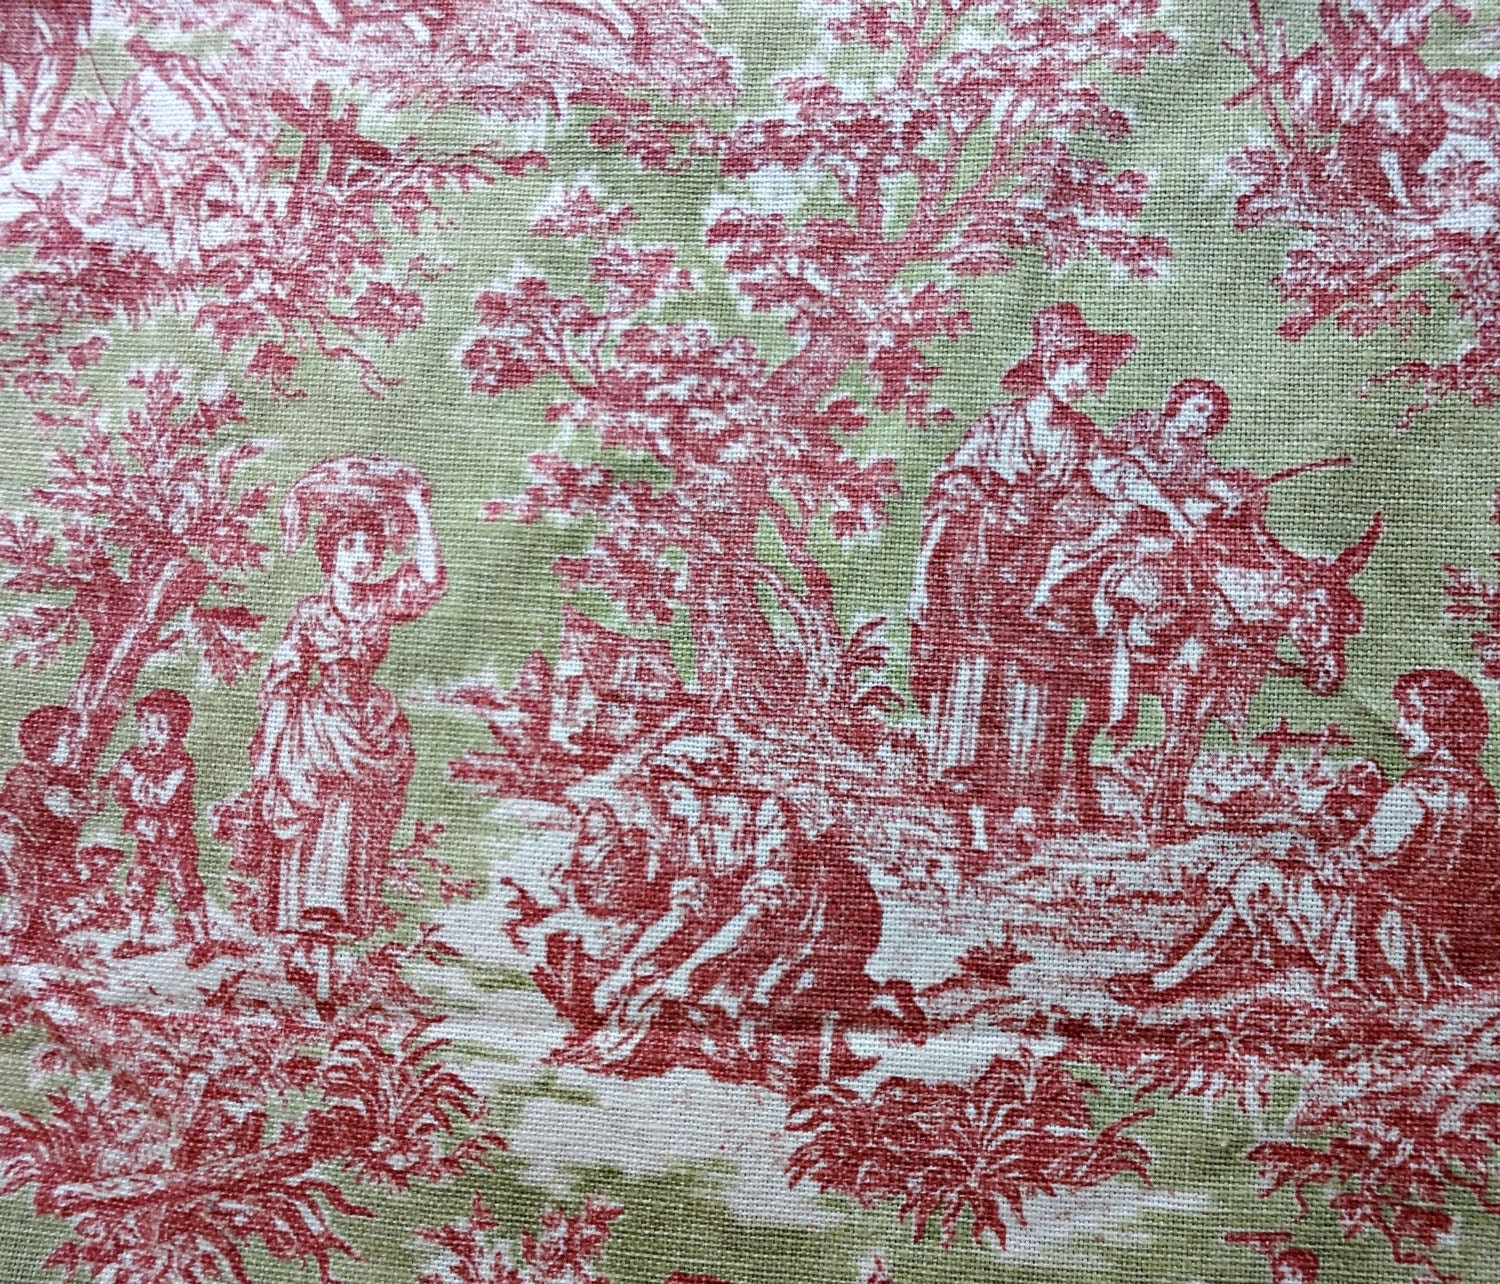 Waverly Rustic Life Toile Fabric Pink And Green 1 Yard